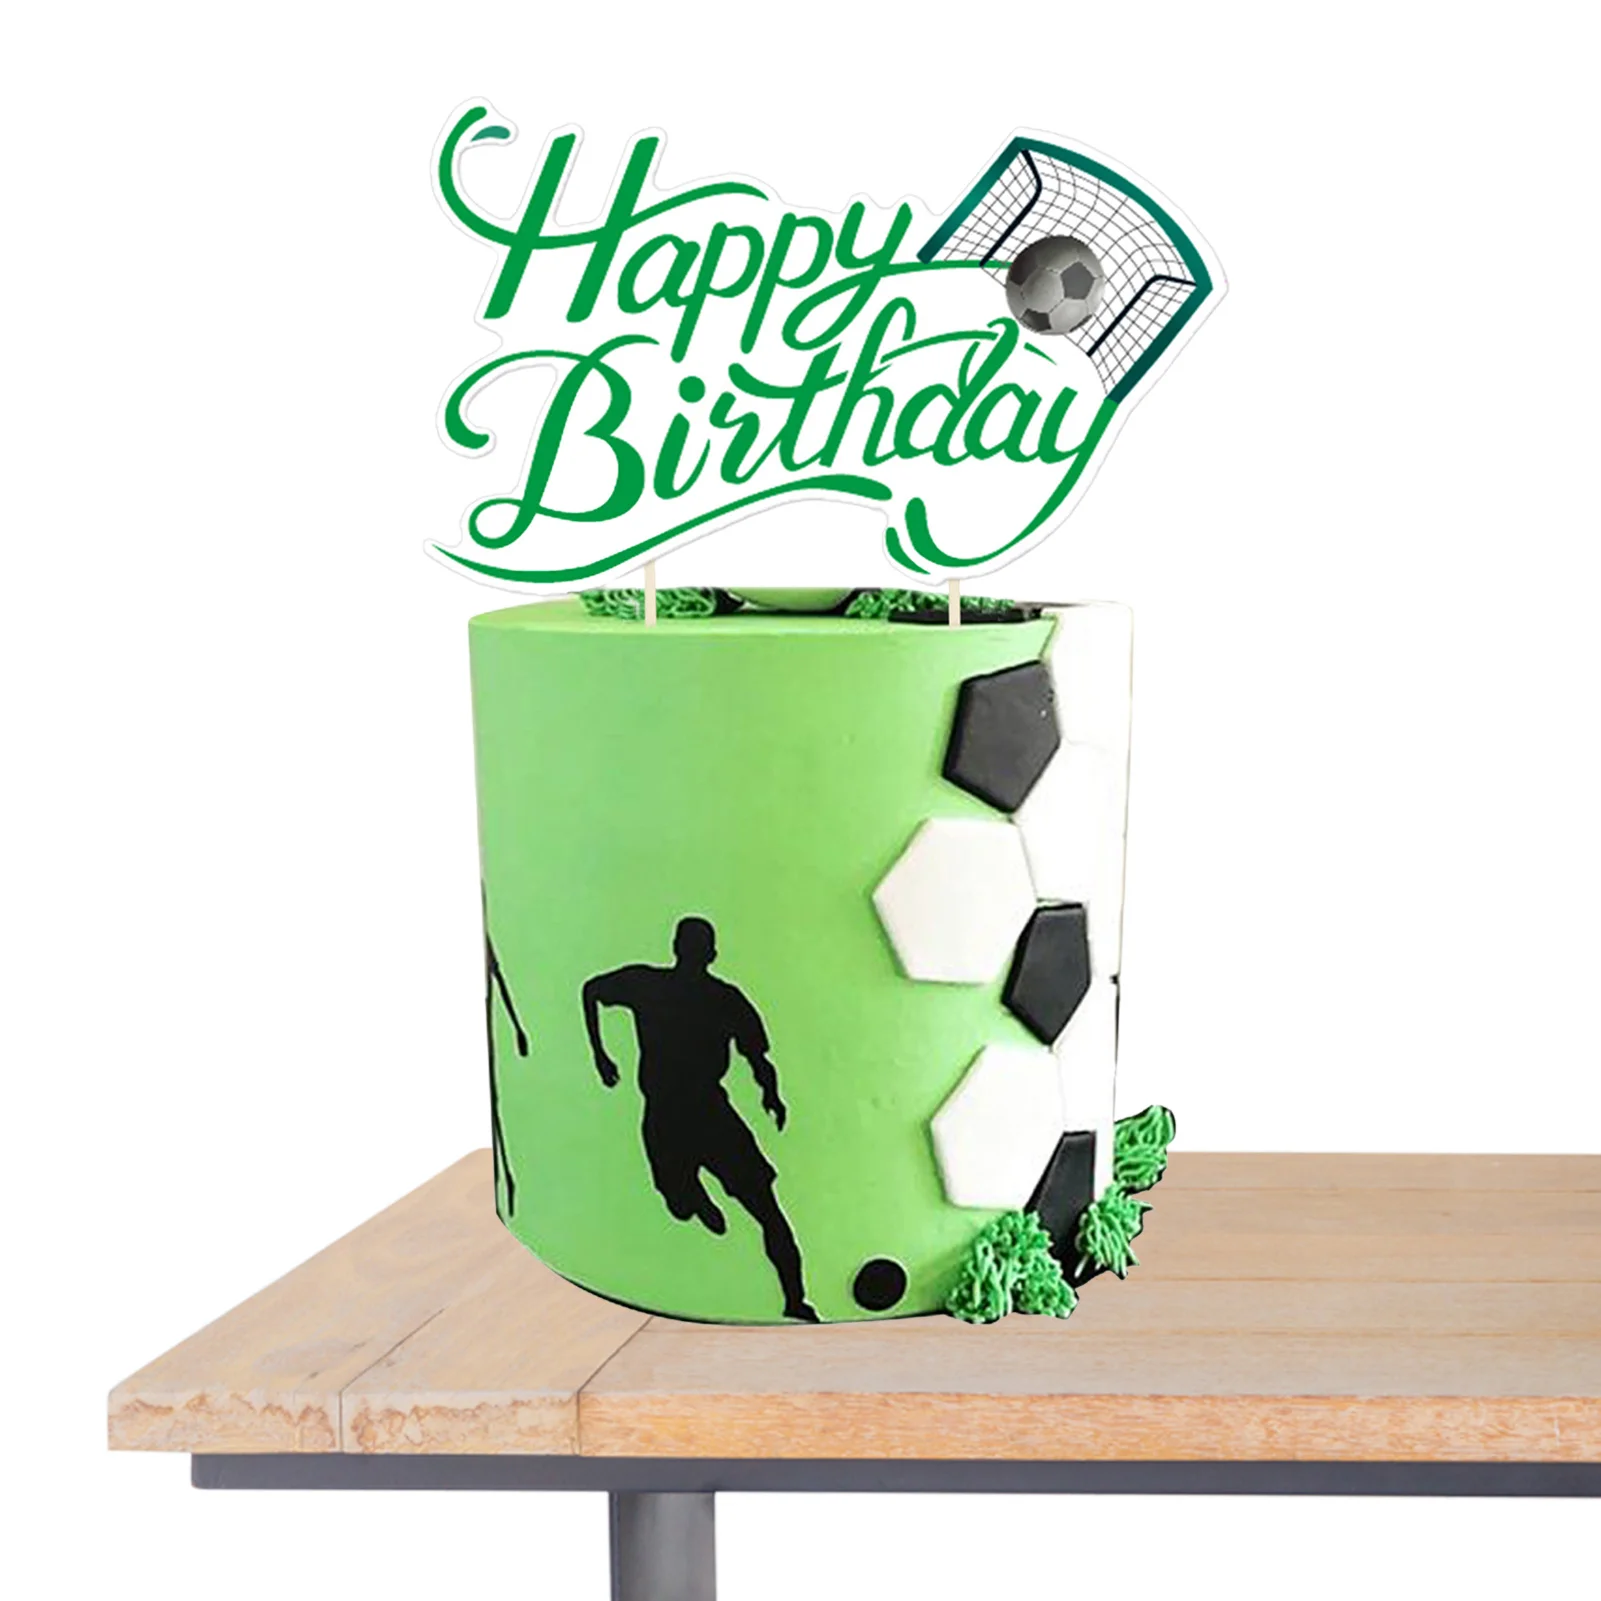 

Soccer Happy Birthday Banner Soccer Goal Cake Soccer Hanging Swirls Decorations Football Themed Birthday Party Supplies For Boys